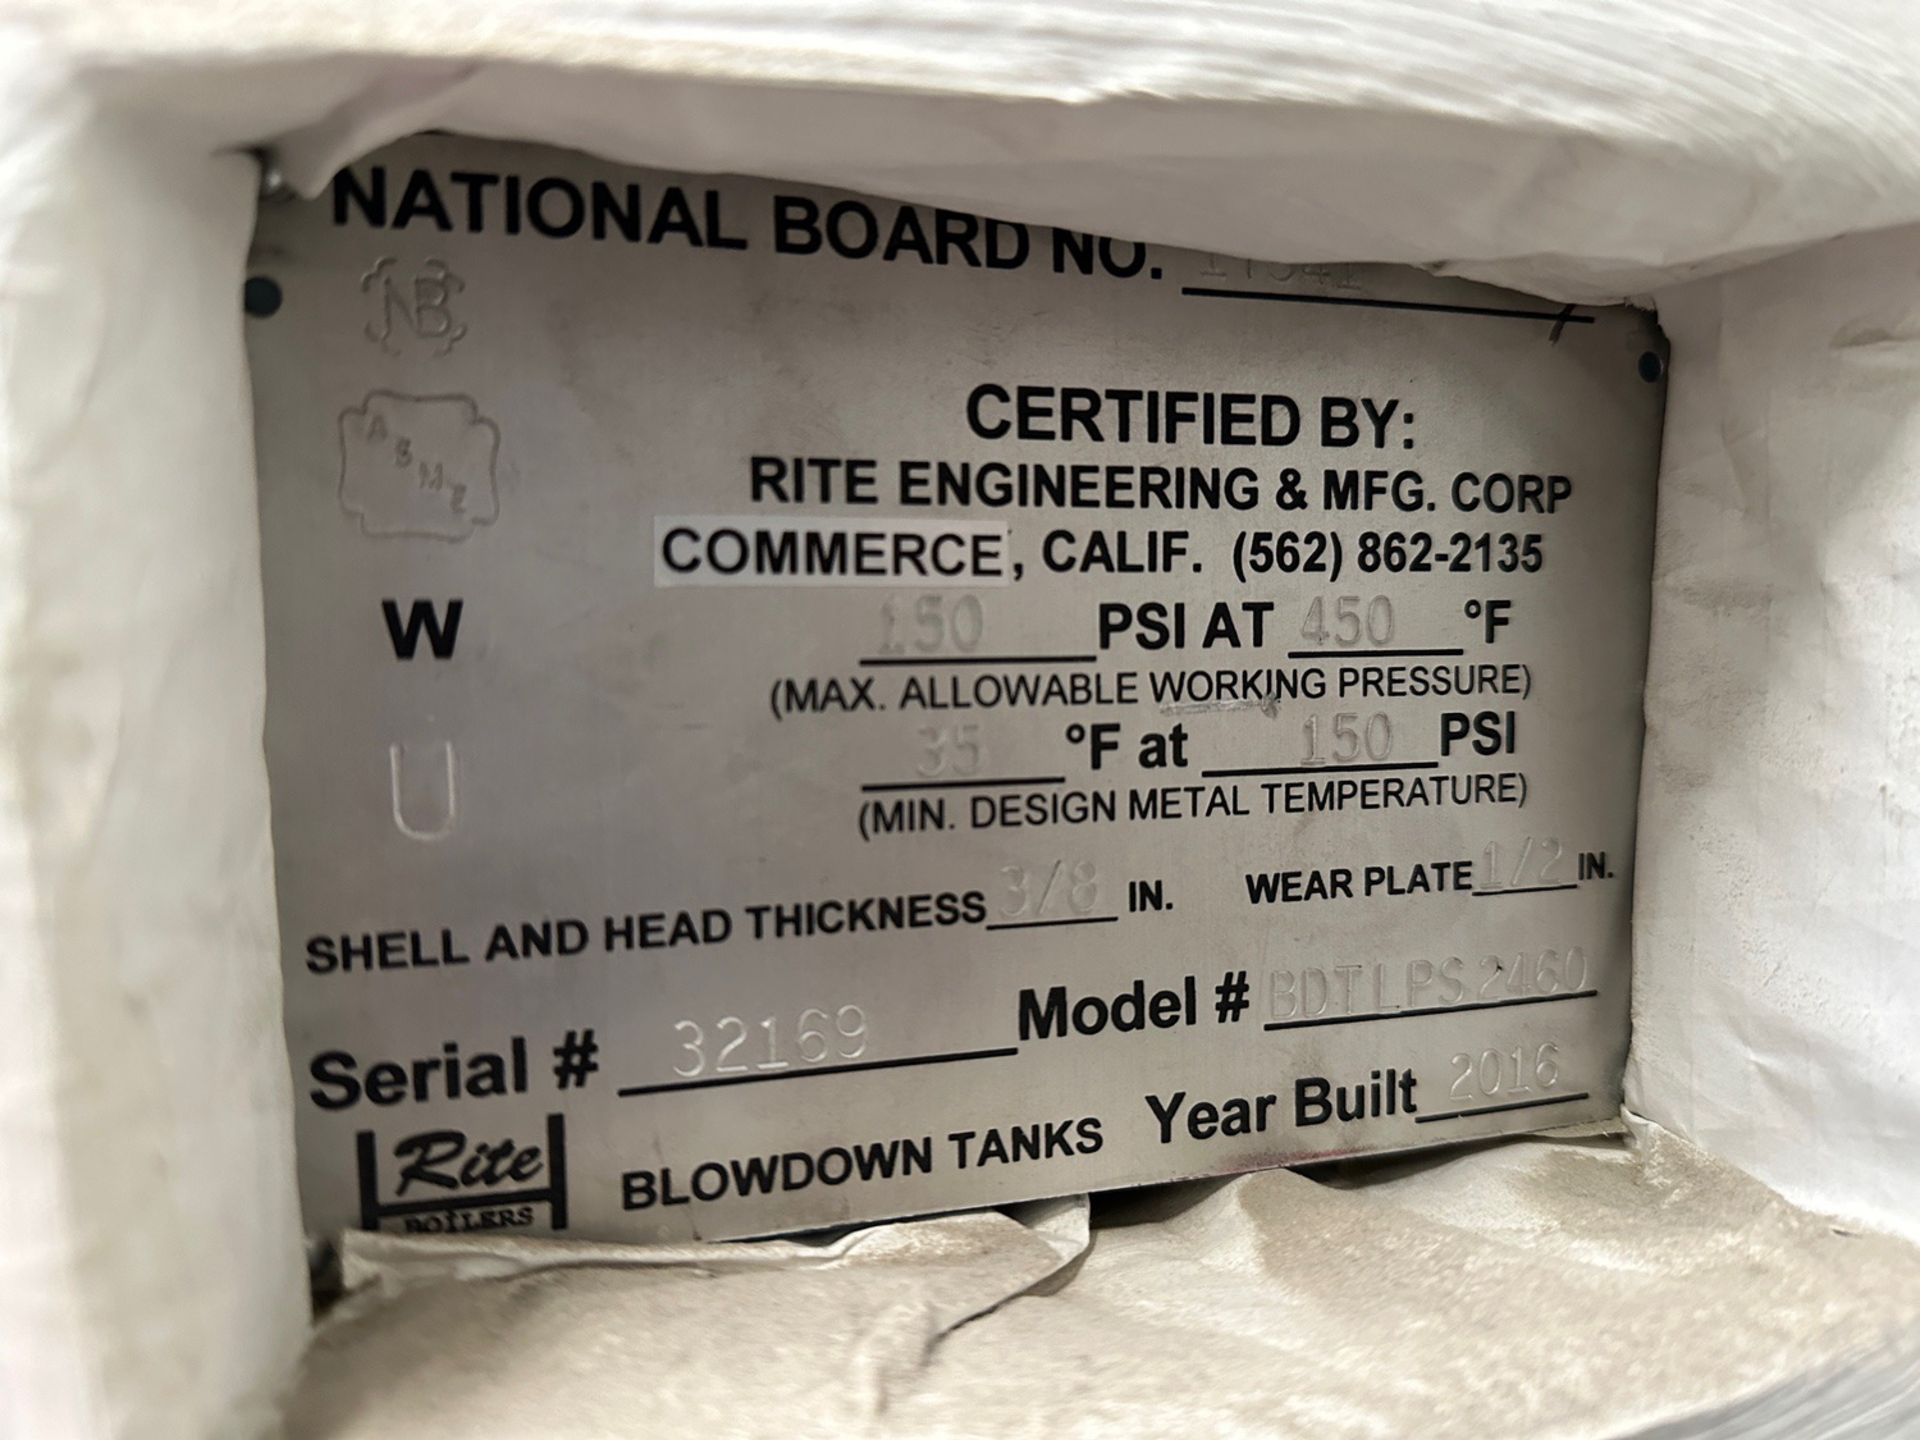 Rite Model 325 S Boiler with Water Treatment System and Blowdown Tank, Max 3.25 MBT | Rig Fee $750 - Image 6 of 6